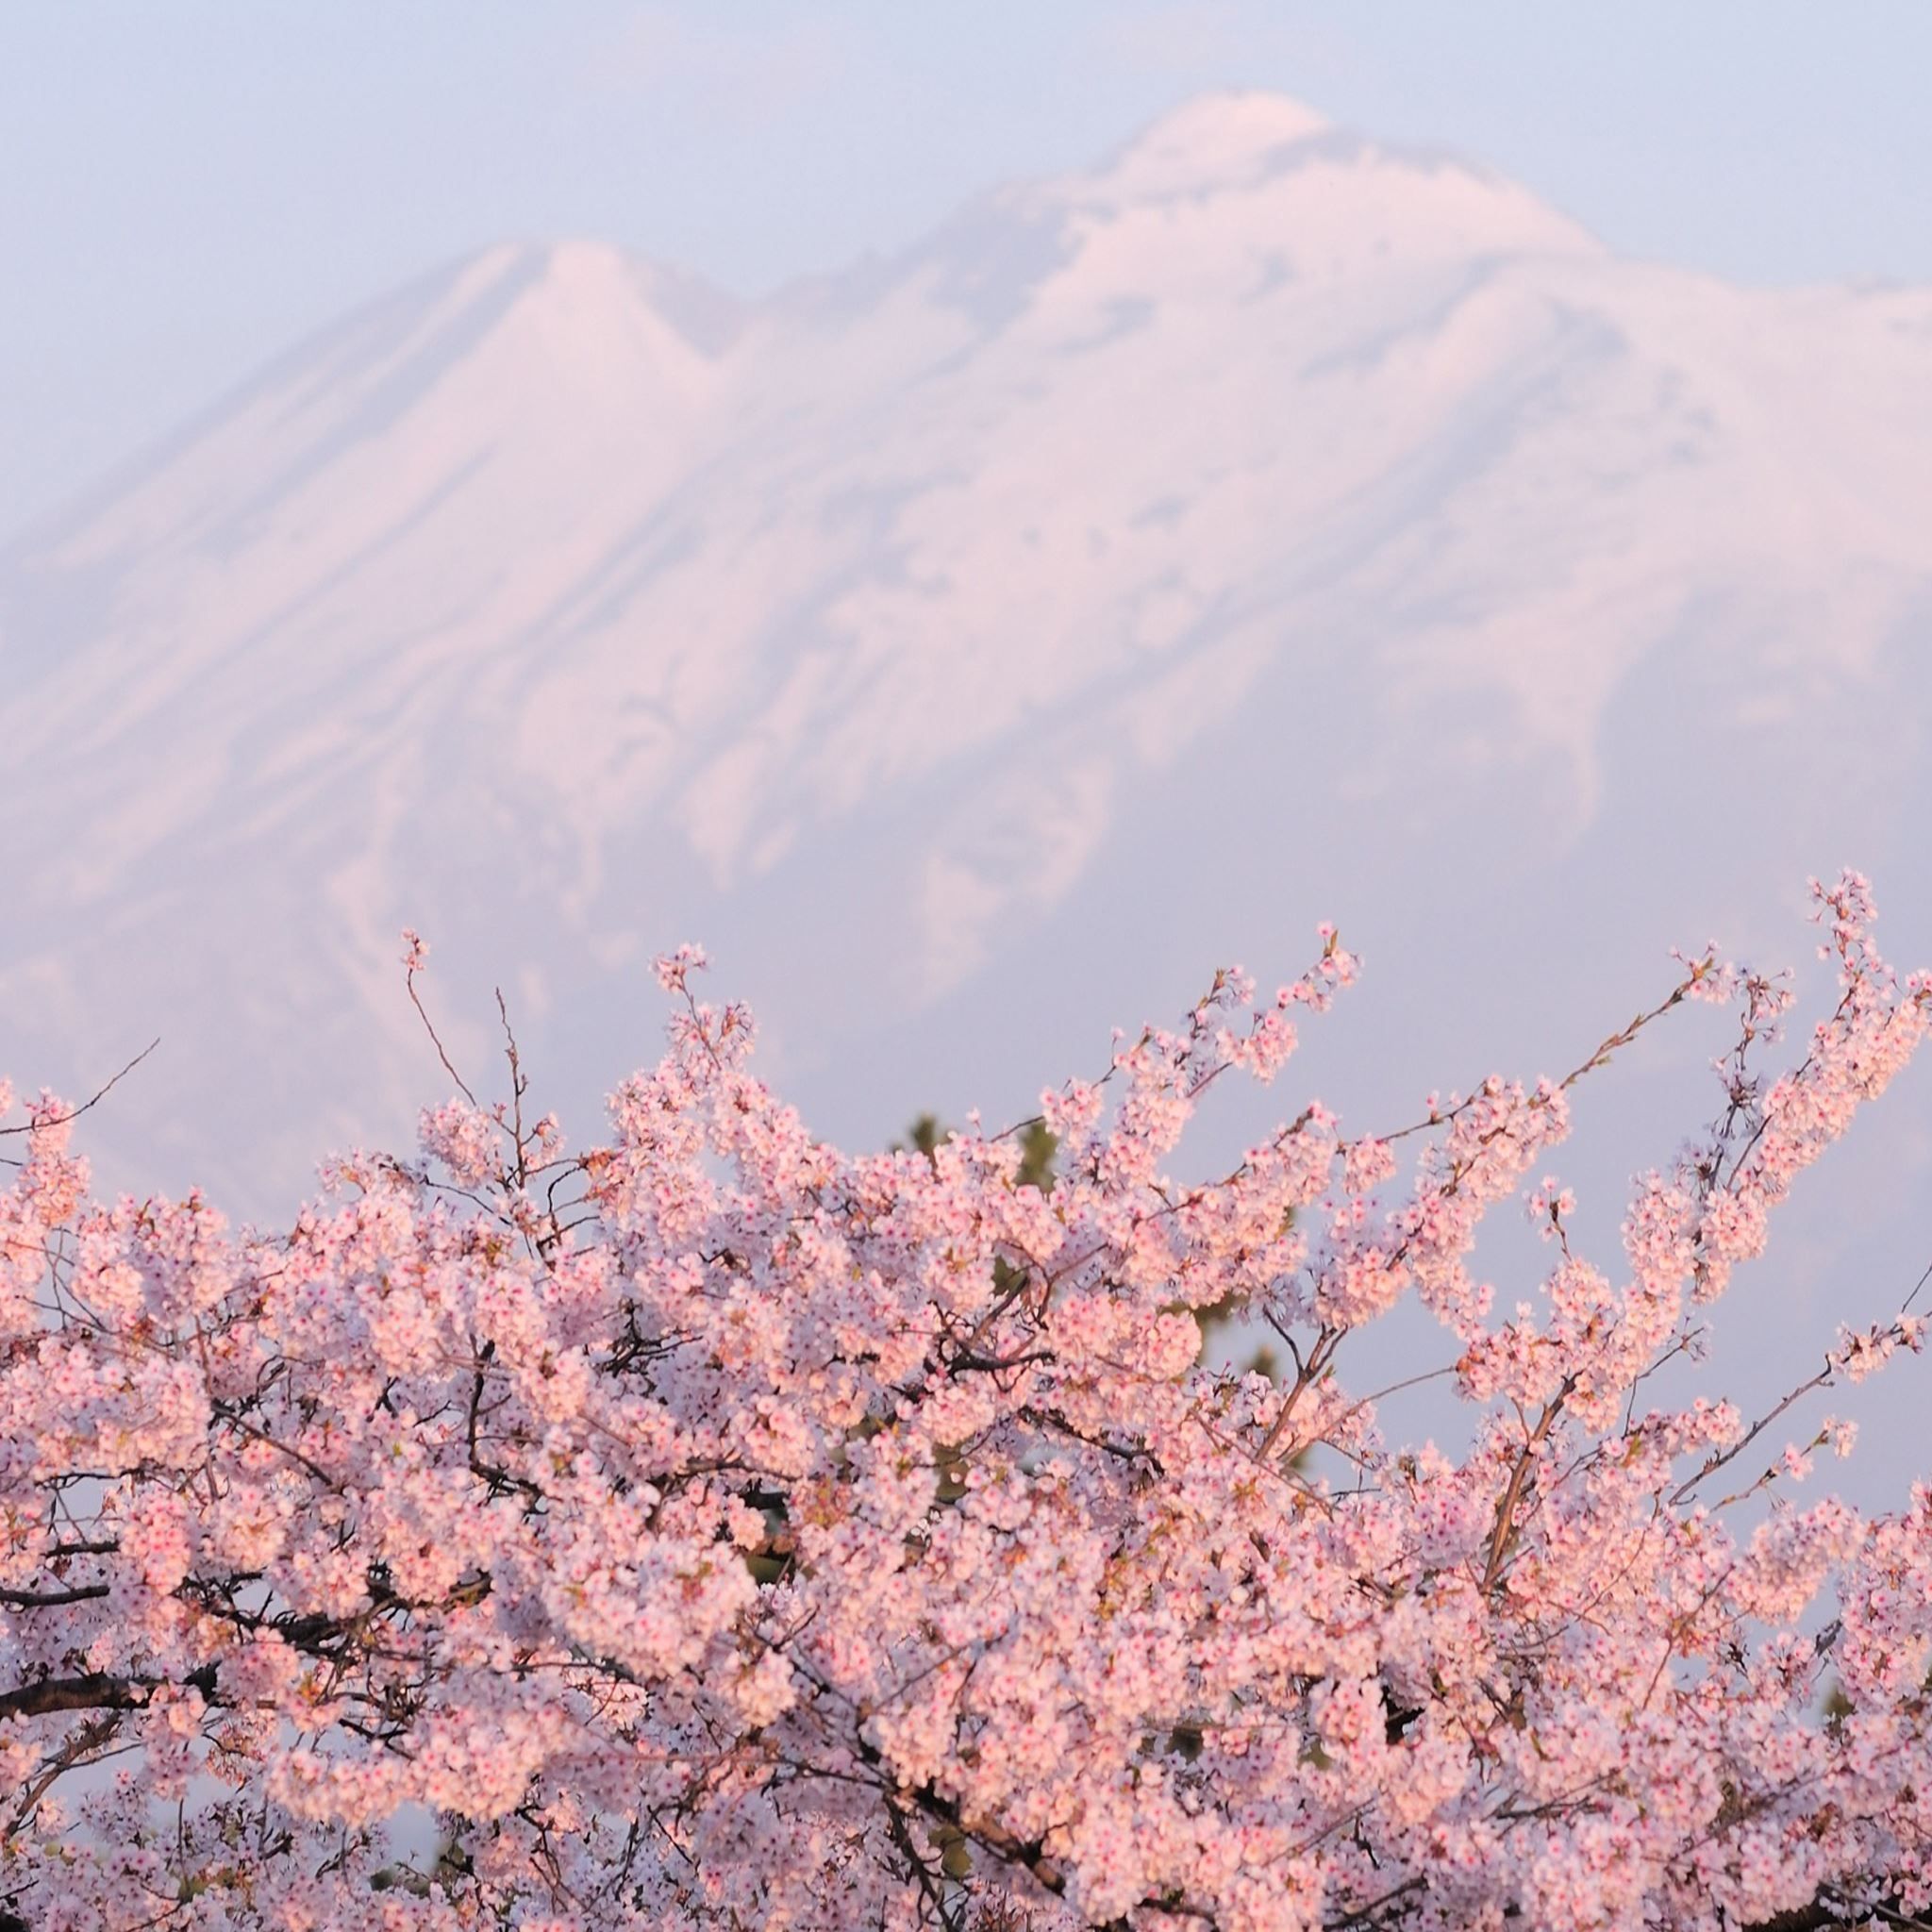 A tree with pink flowers in front of a mountain - Cherry